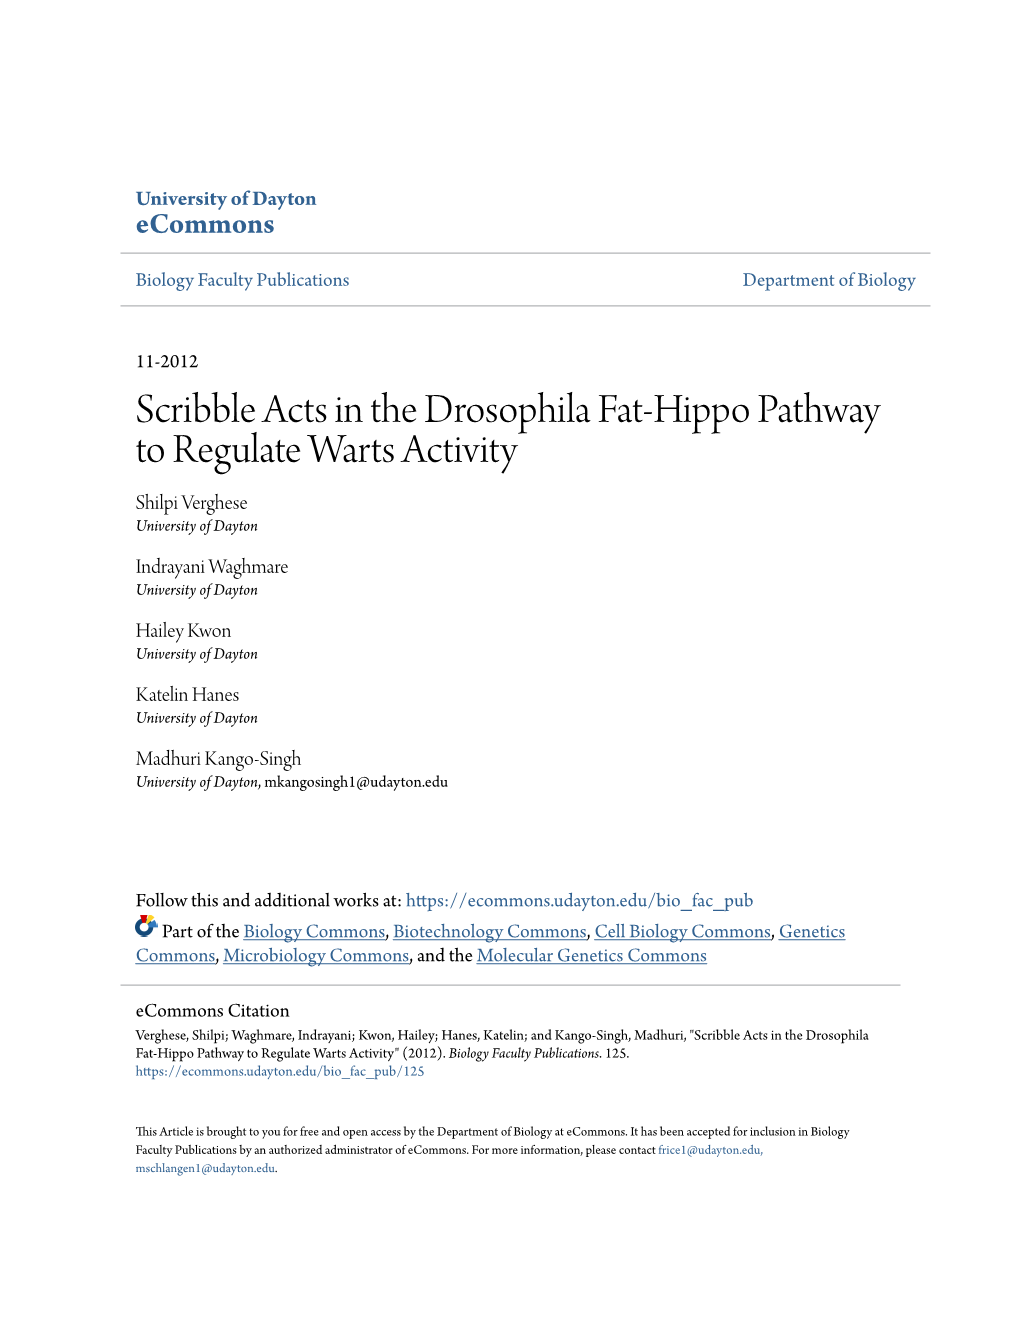 Scribble Acts in the Drosophila Fat-Hippo Pathway to Regulate Warts Activity Shilpi Verghese University of Dayton